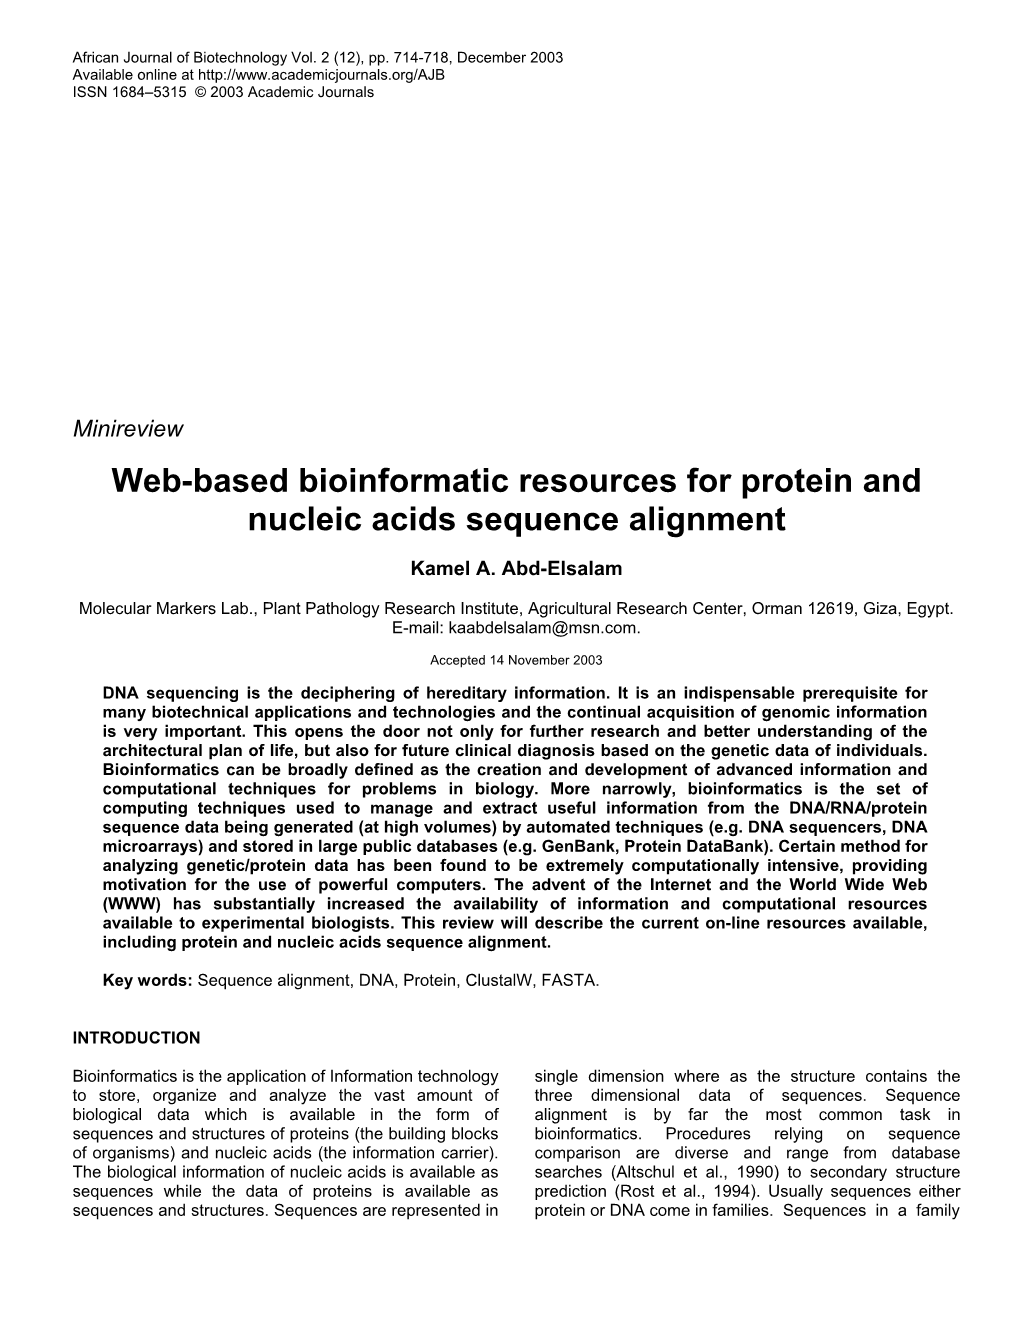 Web-Based Bioinformatic Resources for Protein and Nucleic Acids Sequence Alignment